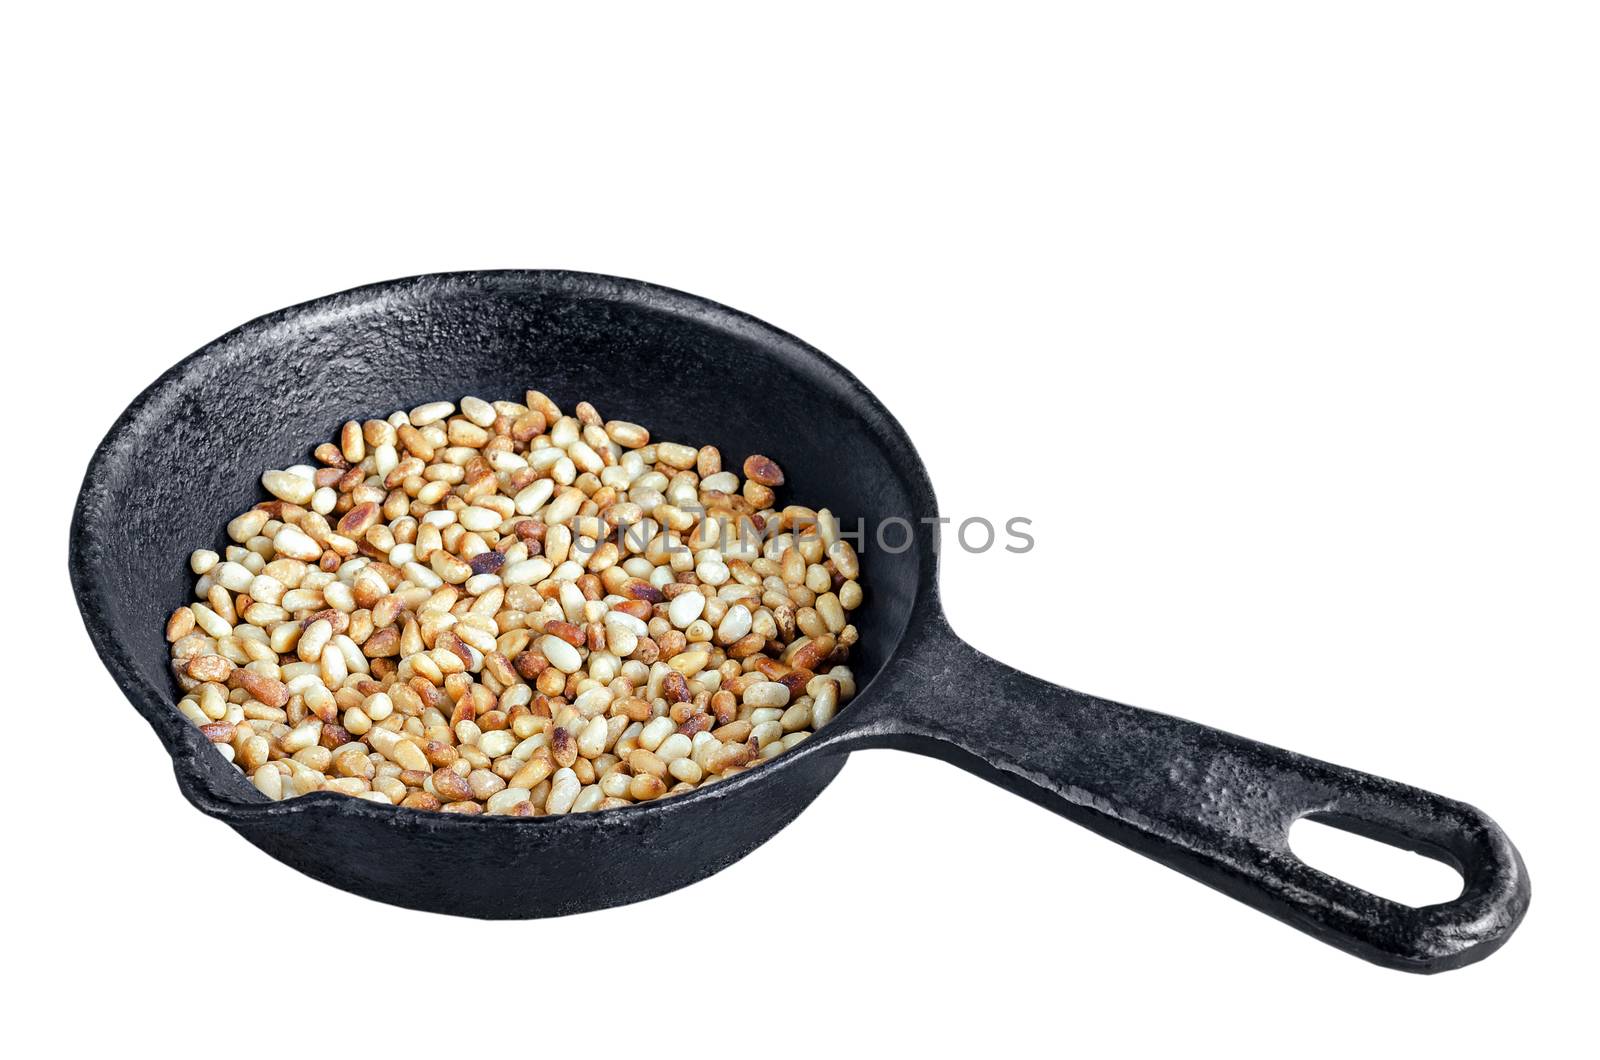 Toasted pine nuts on an old cast iron frying pan, isolated on white background